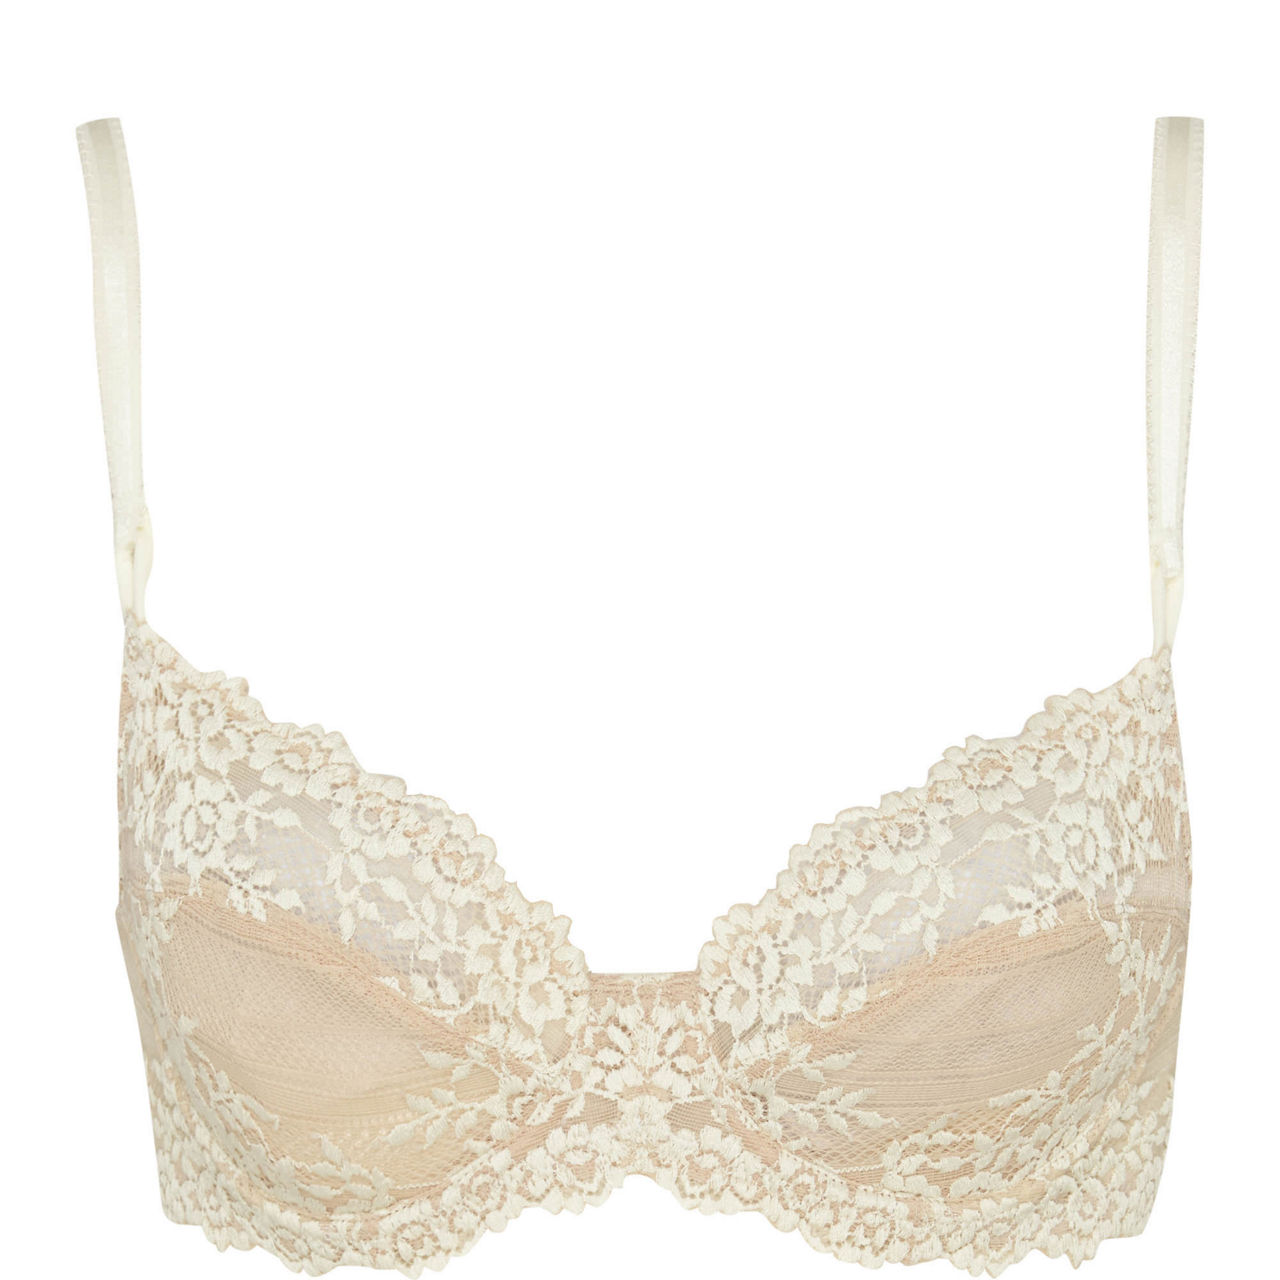 Wacoal Halo Lace Strapless Bra - Bras - Barbours